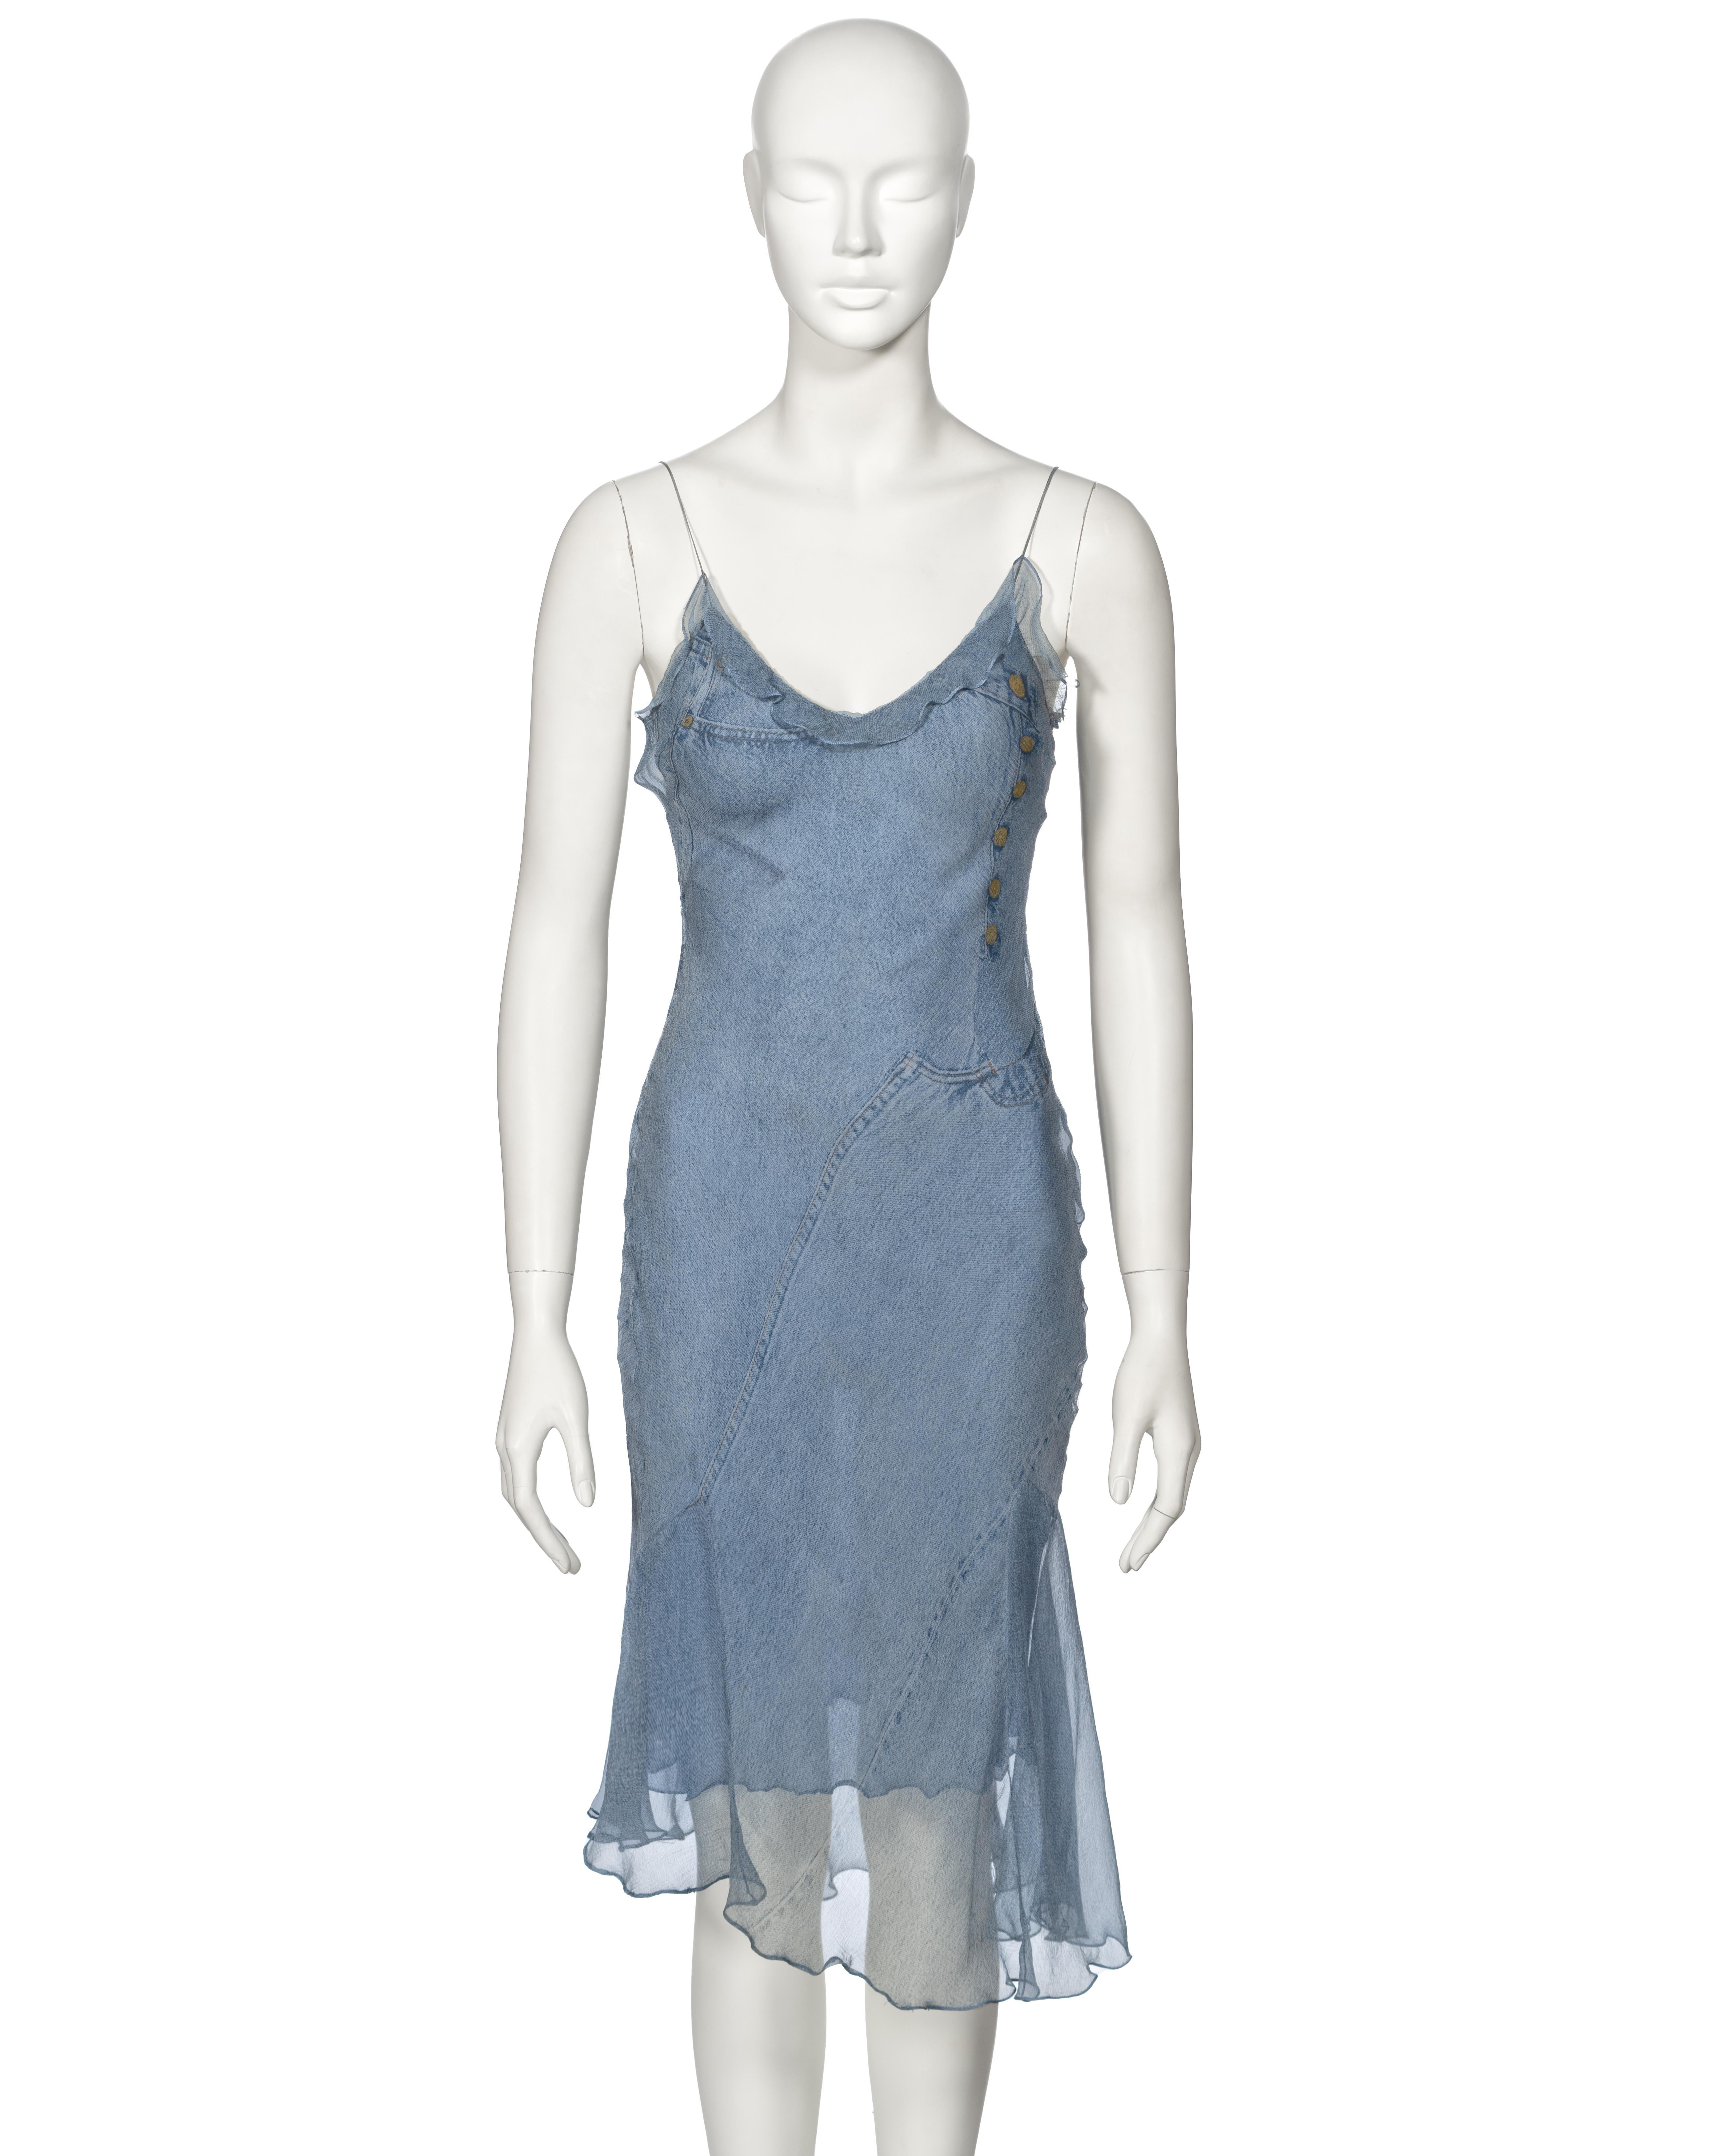 ▪ Archival Christian Dior Dress
▪ Creative Director: John Galliano
▪ Spring-Summer 2000
▪ Constructed from two layers of bias-cut silk 
▪ Features an allover trompe l'oeil print resembling blue denim jeans 
▪ Ruffled trim at the neckline 
▪